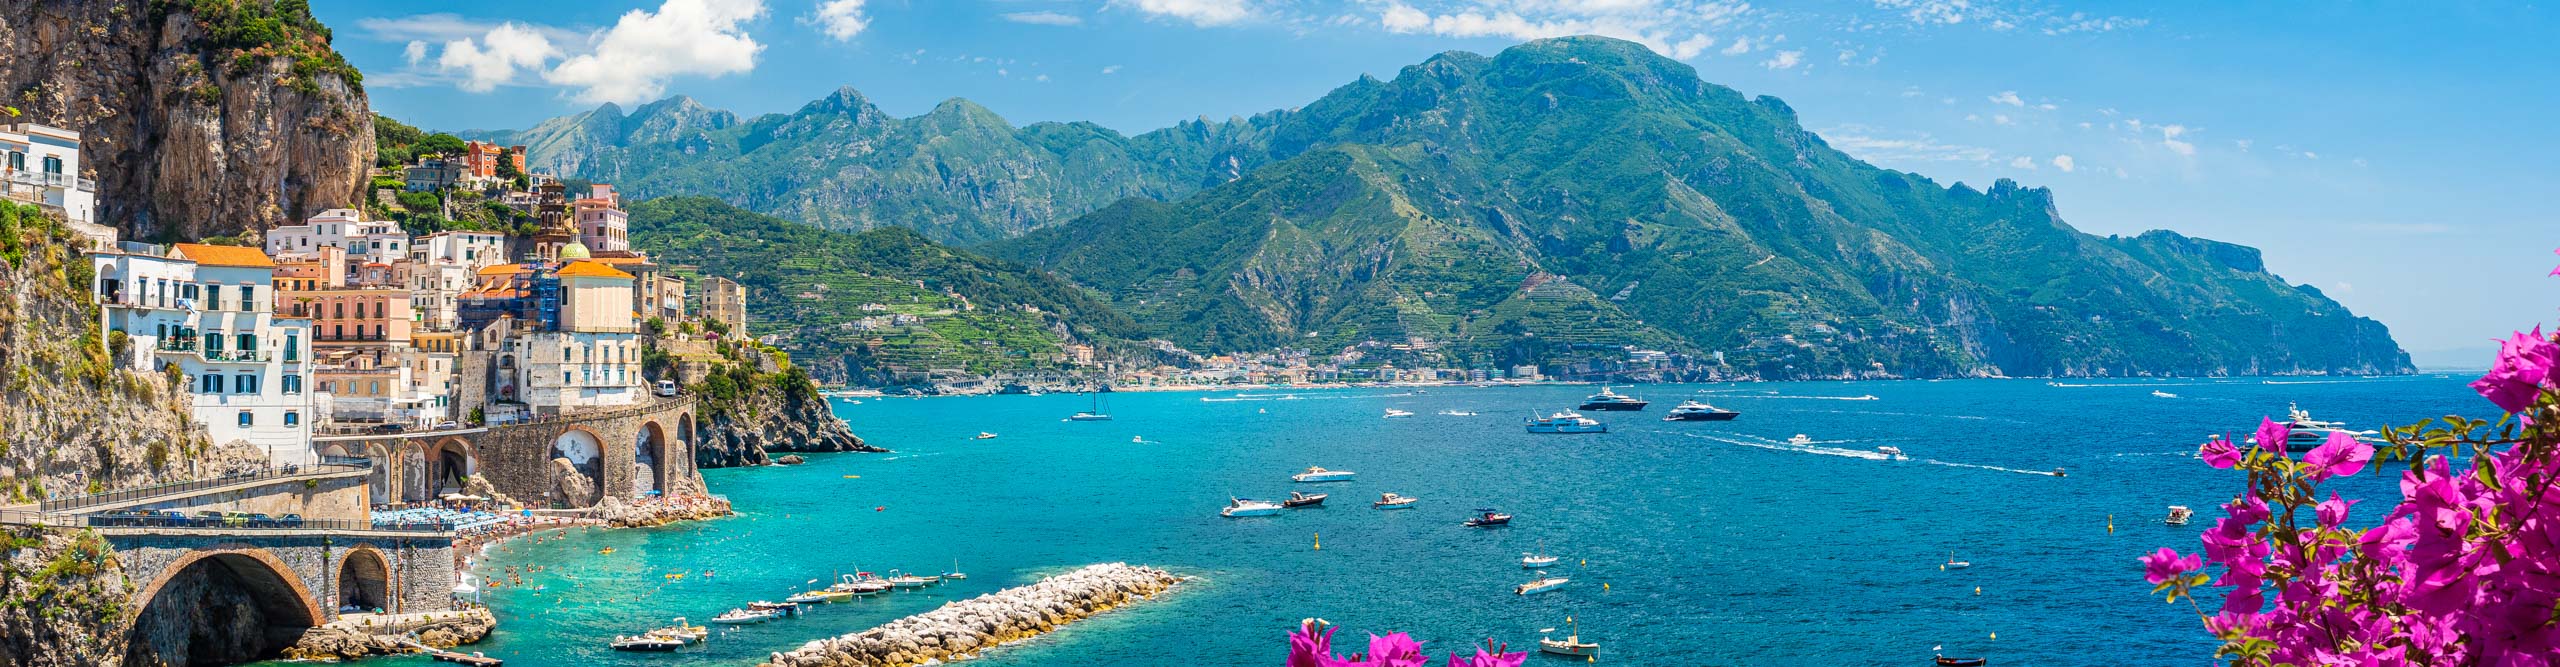 Aerial view of the mountains and harbour on the Amalfi Coast, Italy 